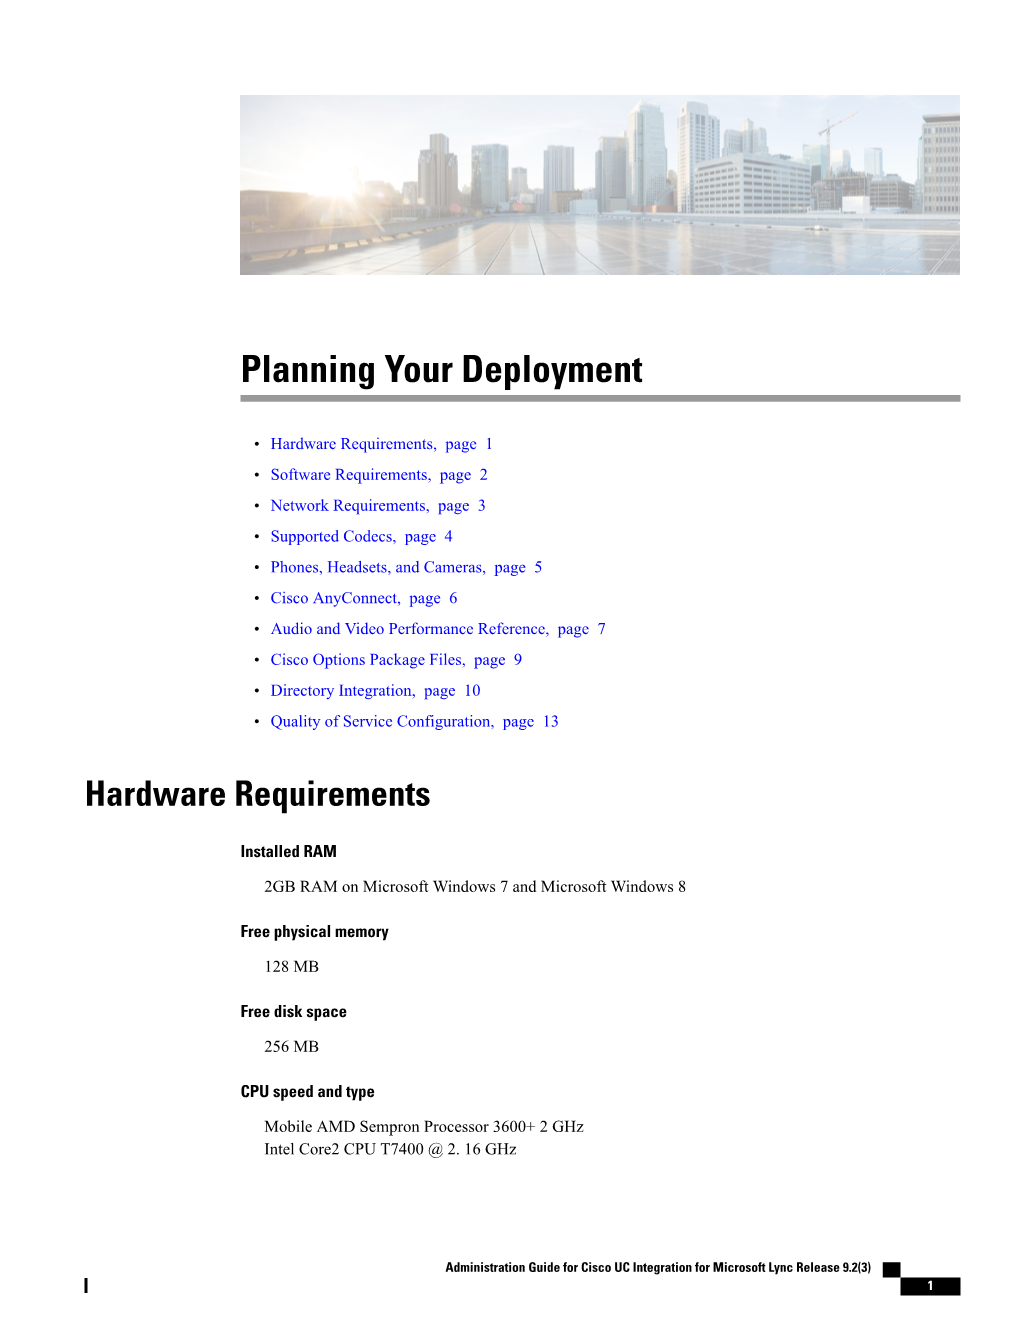 Planning Your Deployment